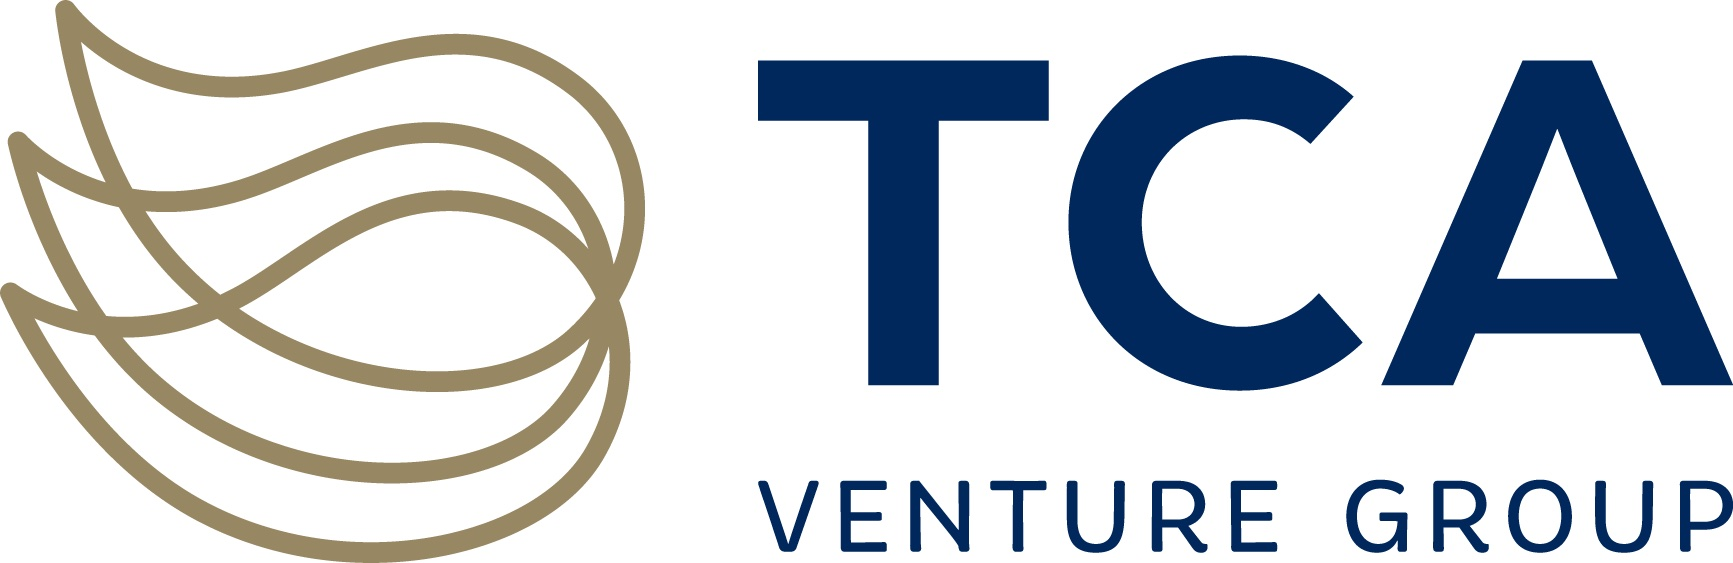 TCA Venture Group (Formerly Tech Coast Angels)